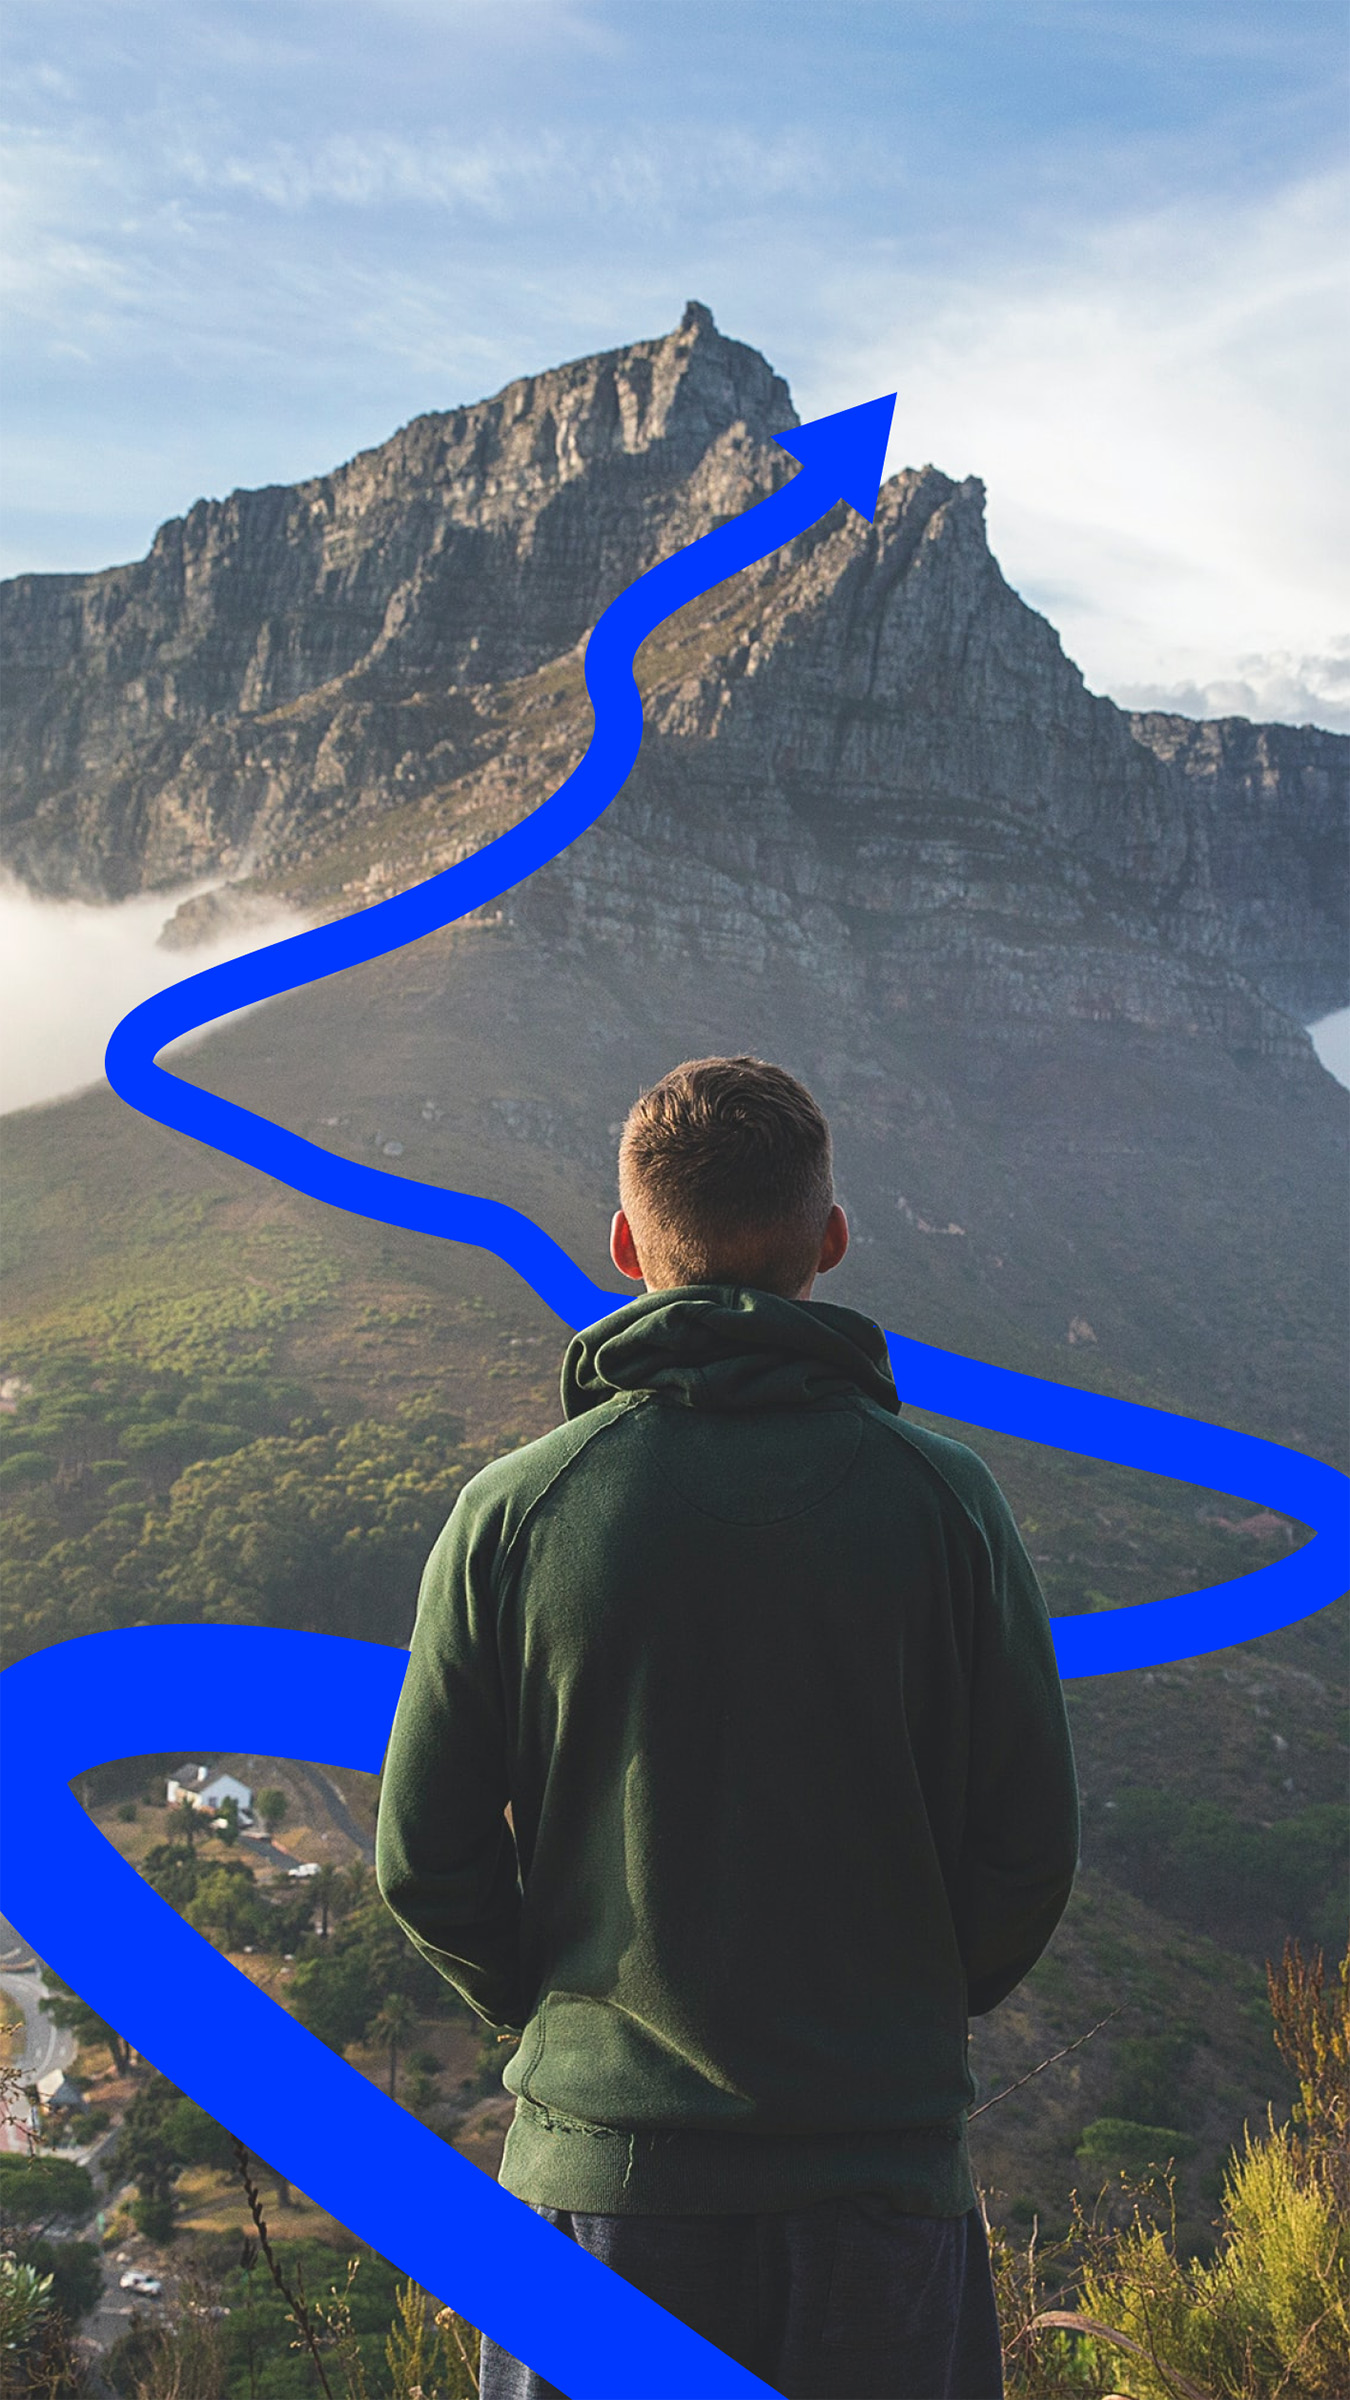 A man stands looking out at a mountain ahead of him. A blue arrow winds around him tracing his future path up a mountain.